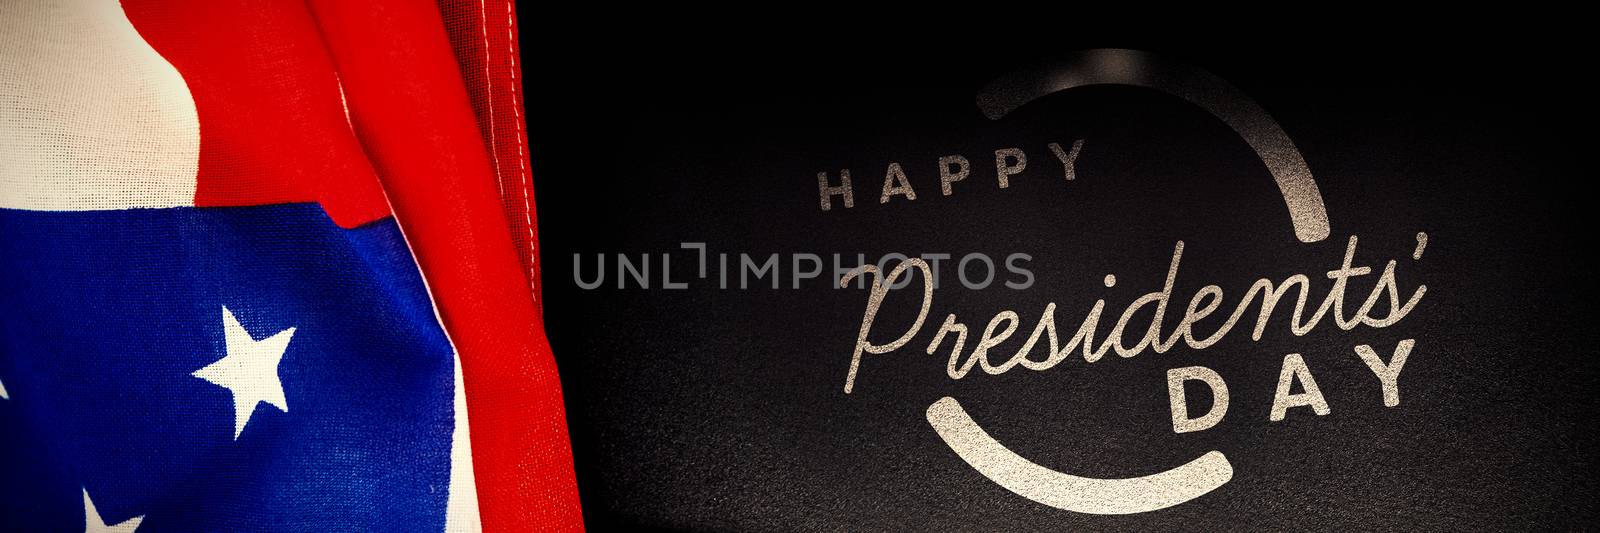 Happy presidents day. Vector typography against american flag on black background